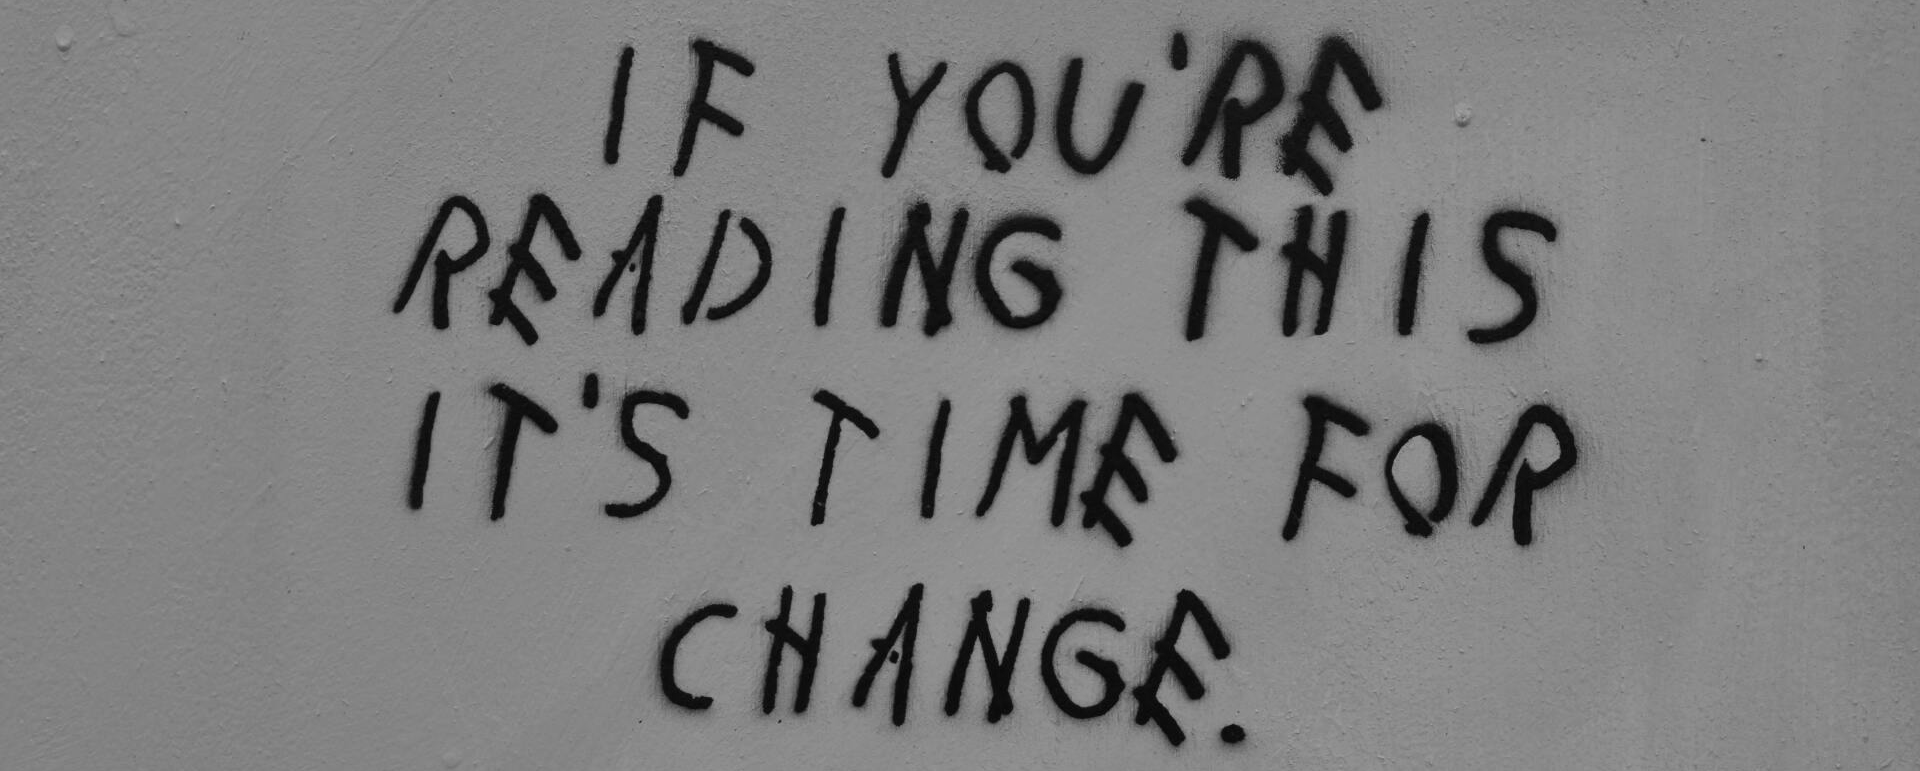 If you're reading this it's time for change